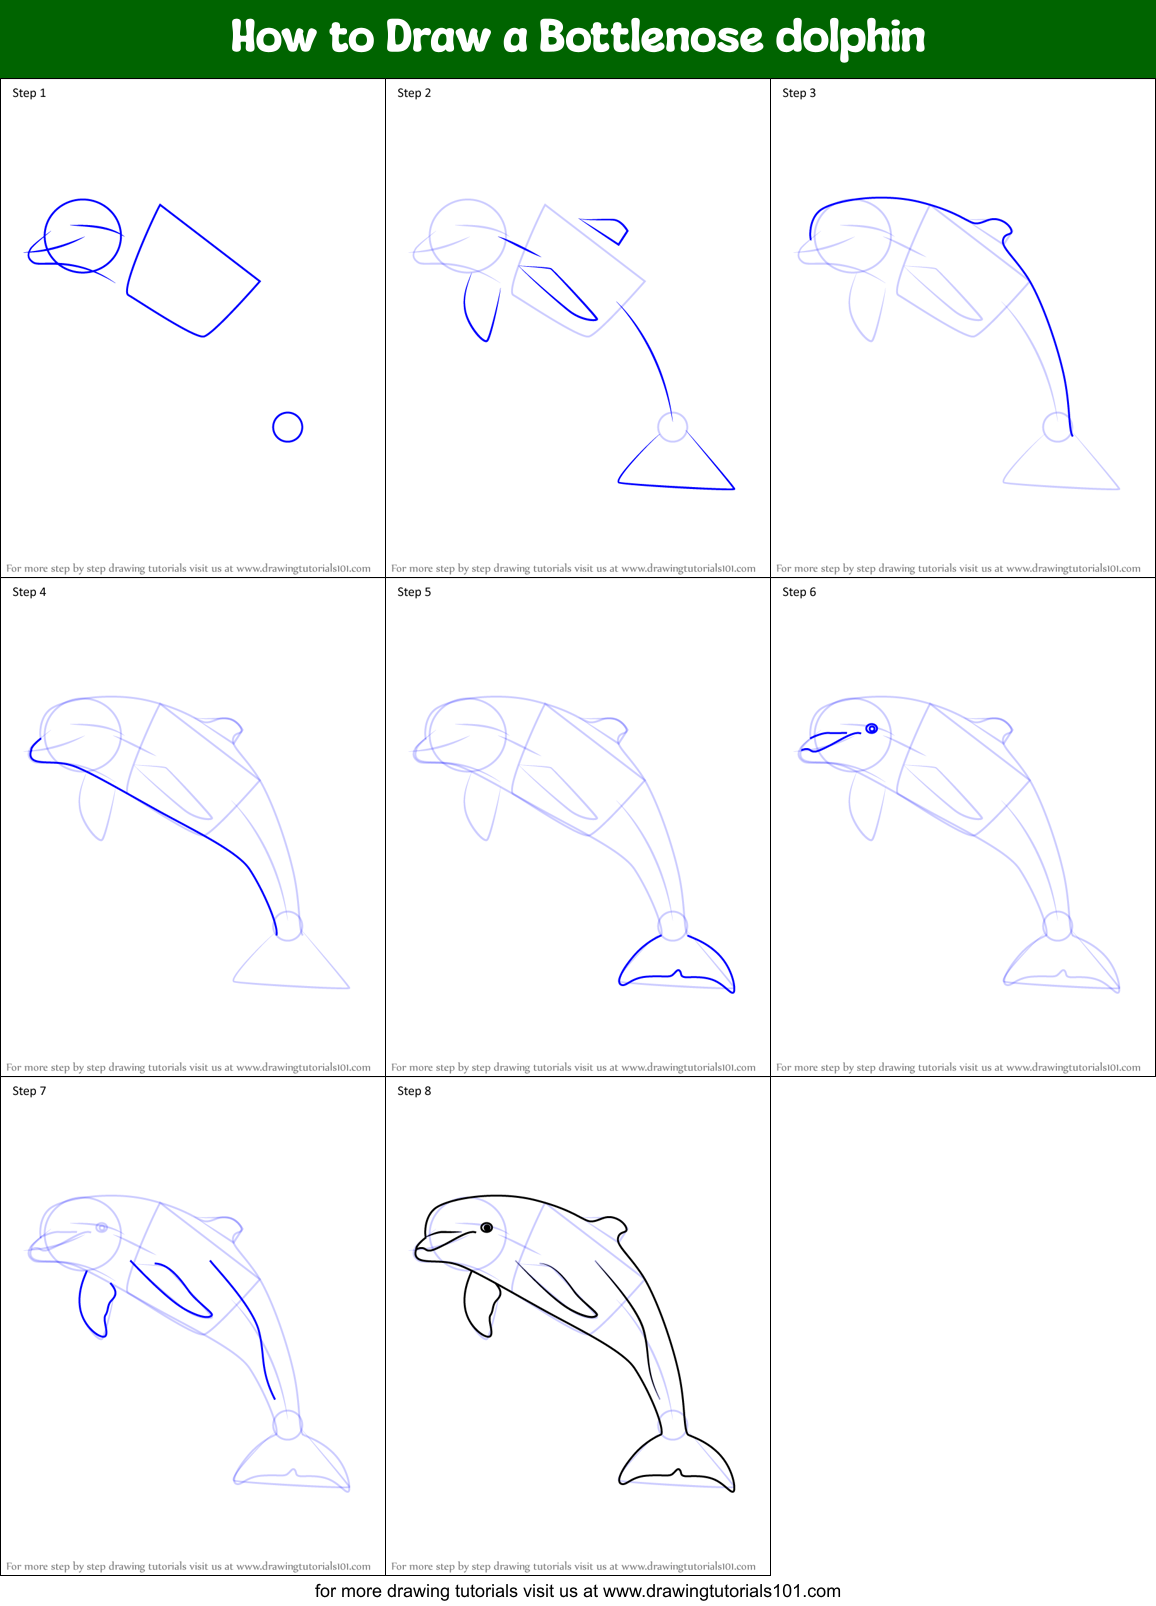 How to Draw a Bottlenose dolphin printable step by step drawing sheet